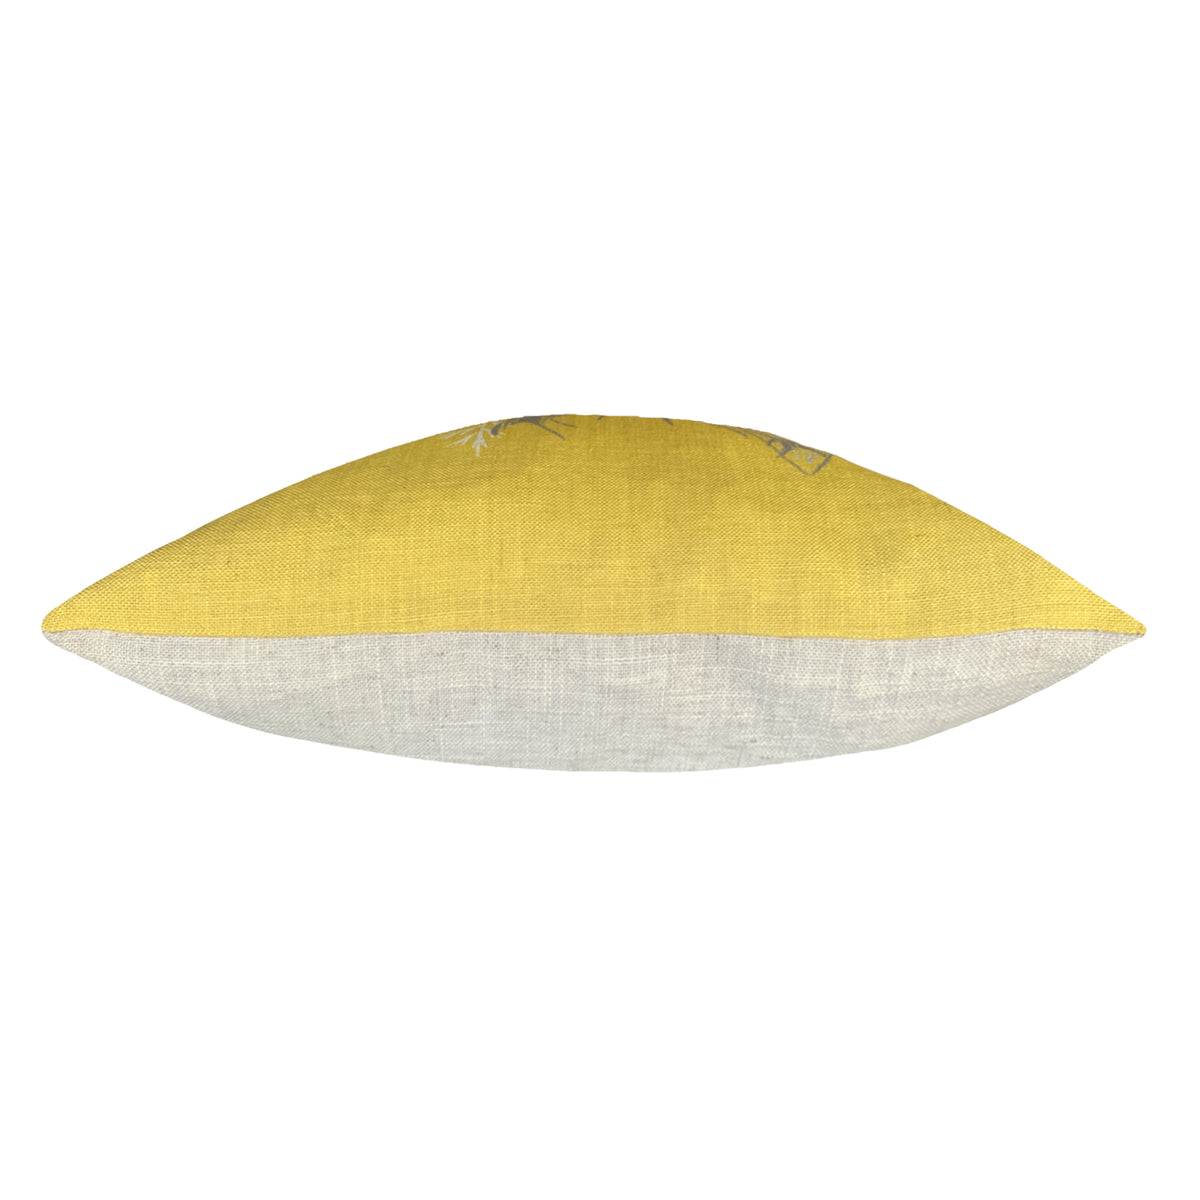 Trudy Stag Repeat Polyester Cushion | Ochre